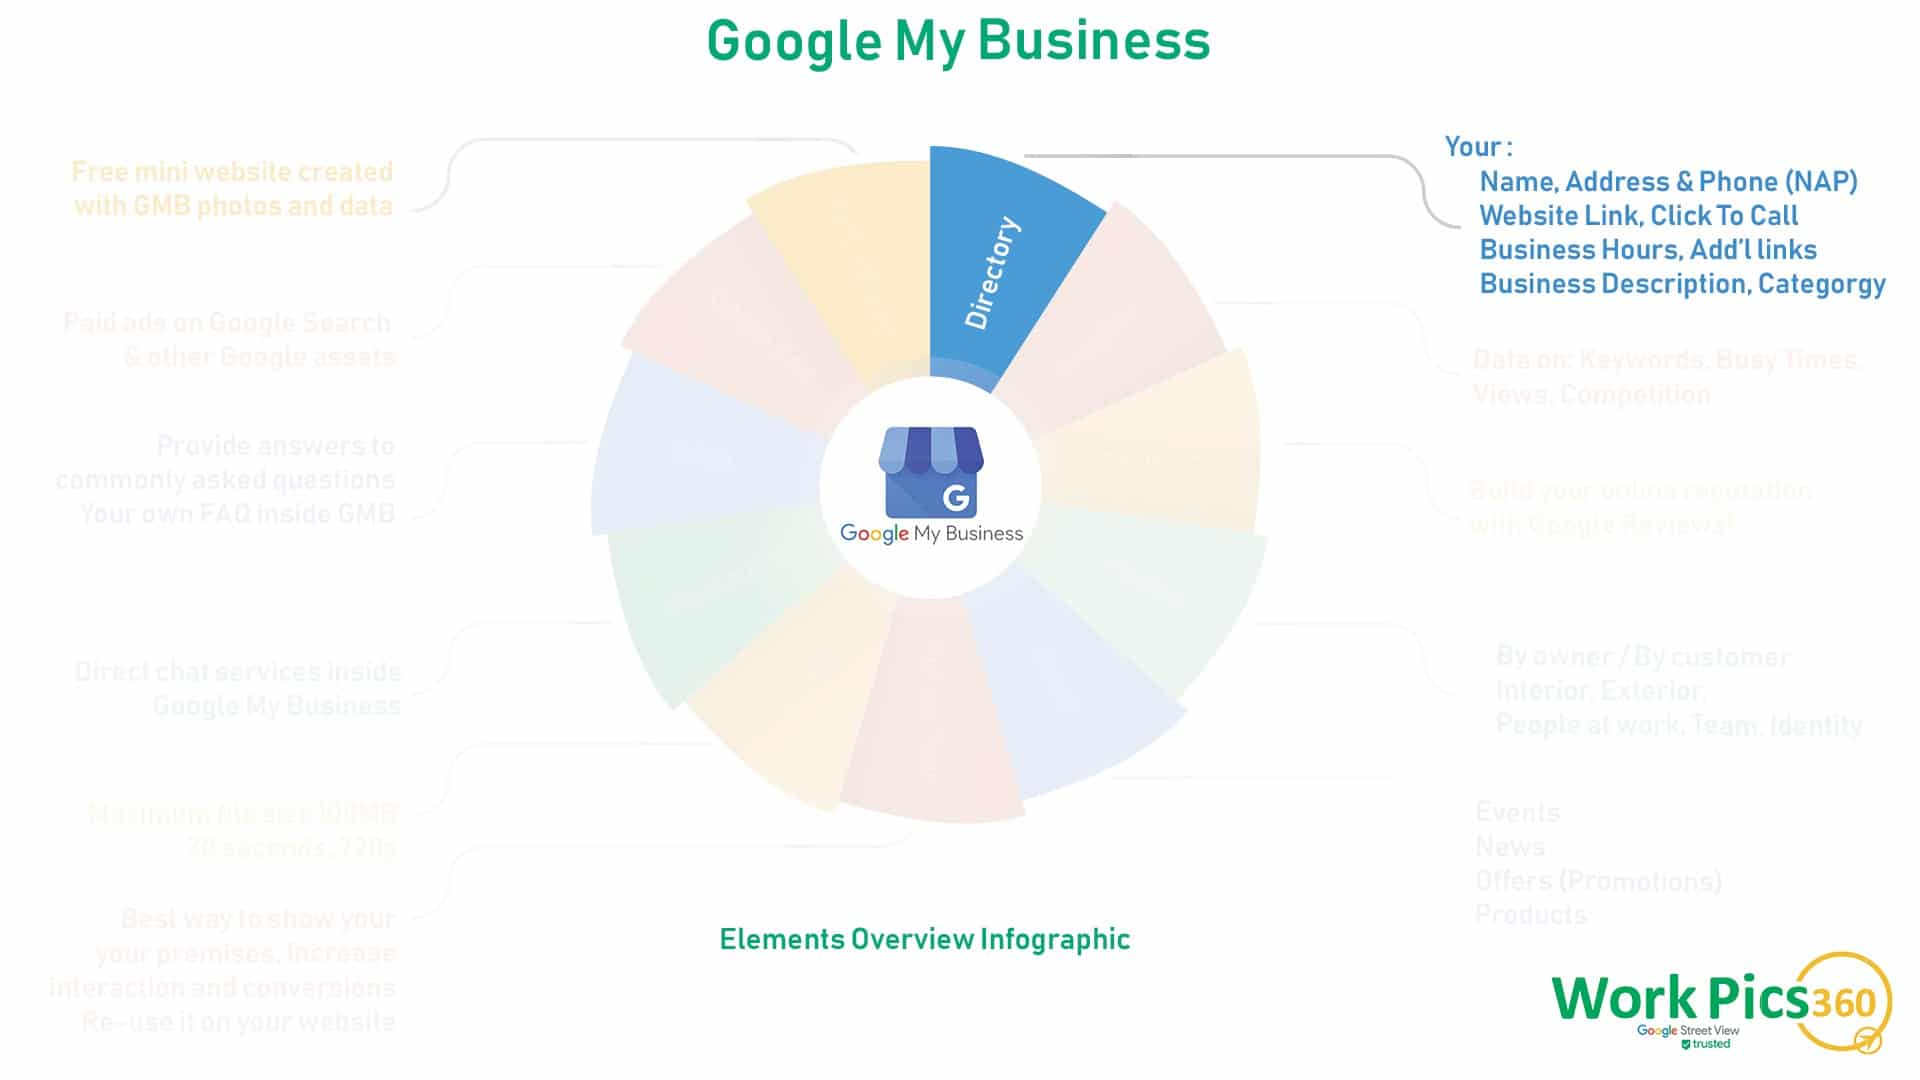 Google My Business Infographic: Directory - Section 1